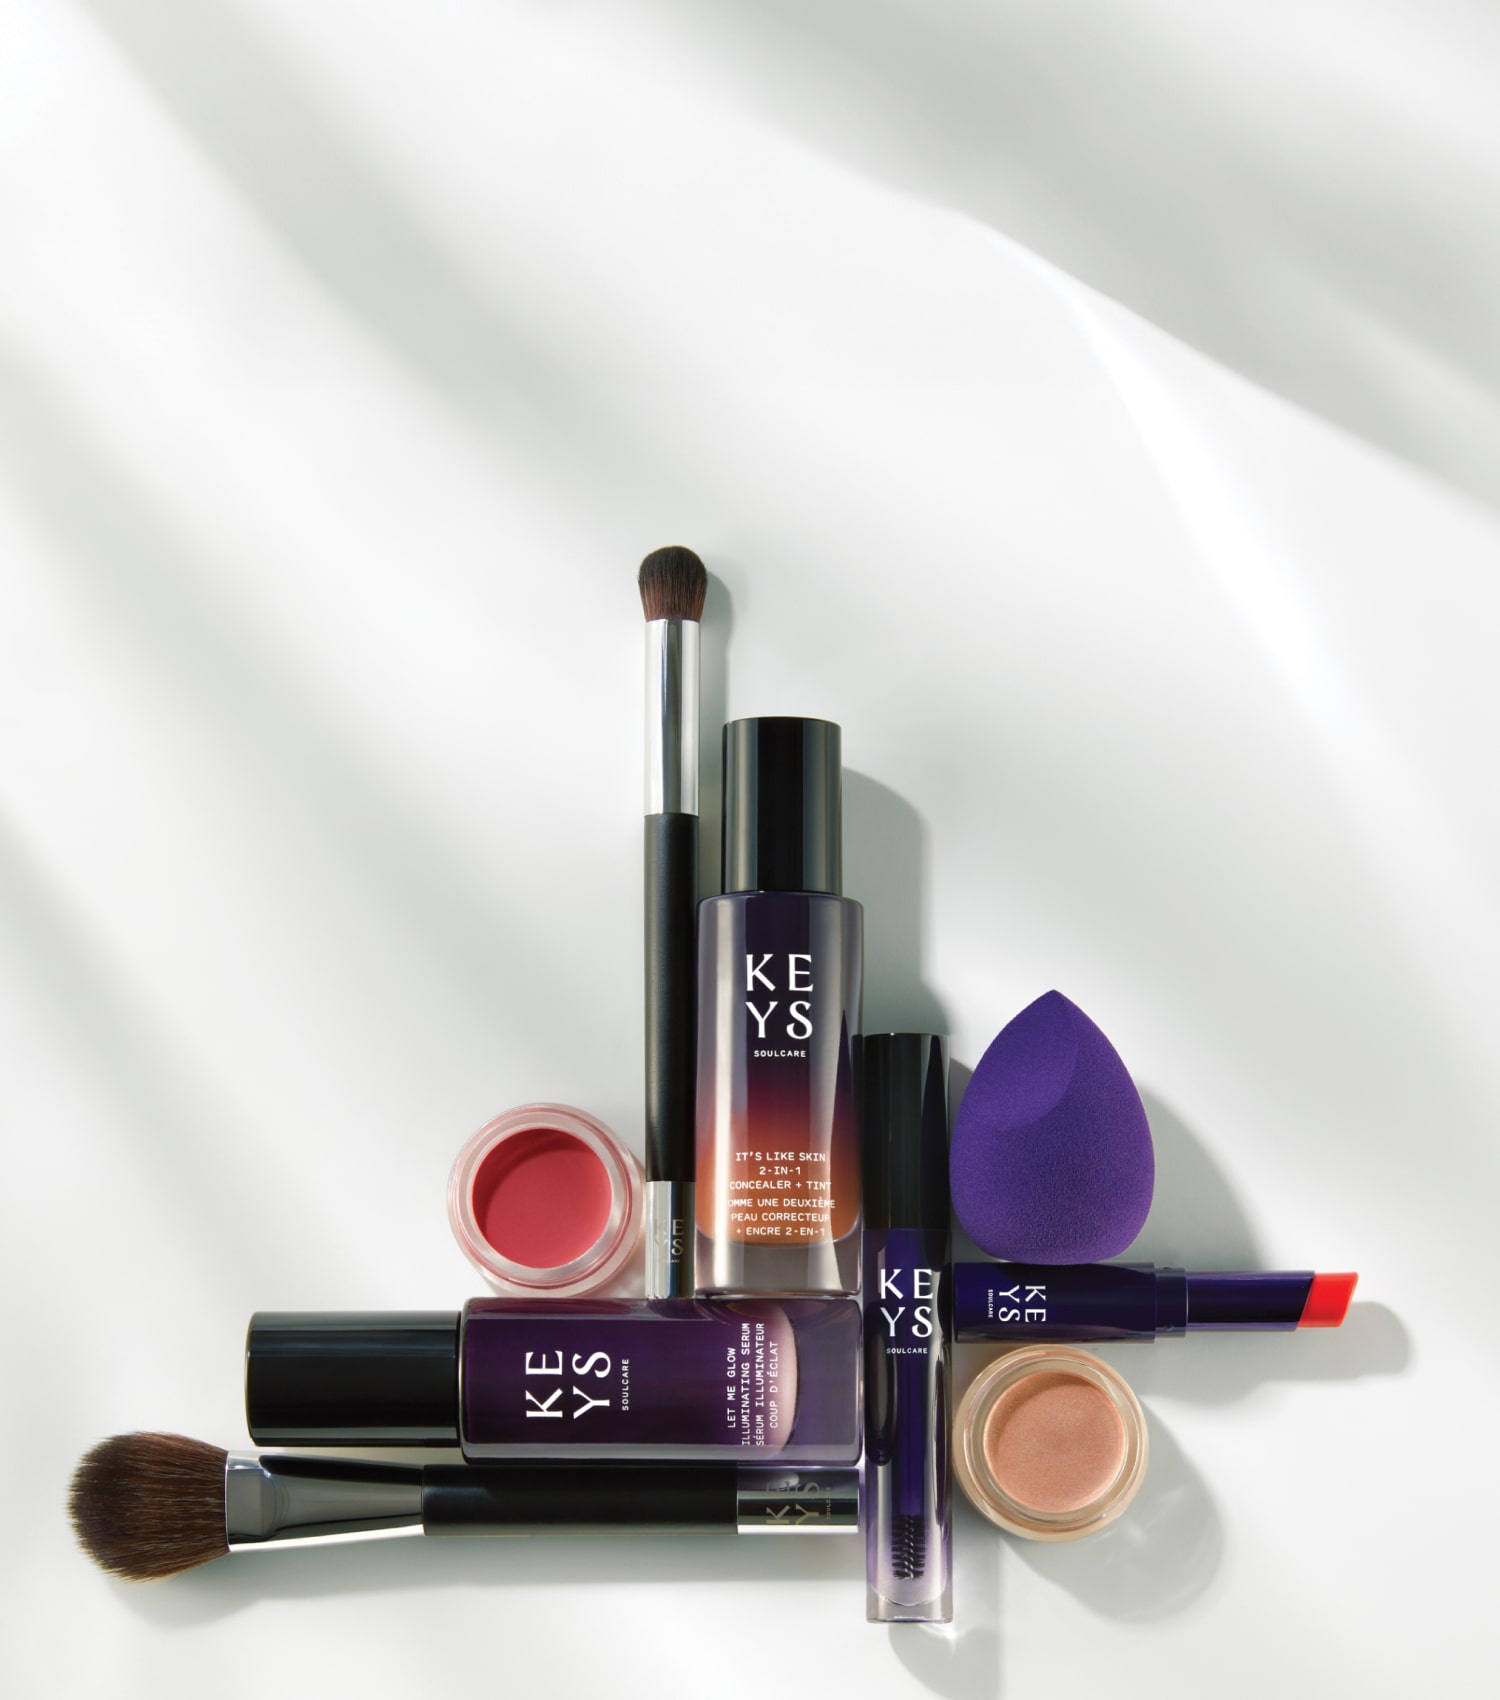 Promotional image featuring an array of makeup products arranged on a white surface with shadows suggesting soft lighting. The products include a makeup brush, a bottle of foundation, a mascara wand, a red lipstick, a purple makeup sponge, and a small open jar of cosmetic cream. The text 'MAKEUP' is prominently displayed in large black letters, followed by a smaller caption 'Discover skincare-makeup hybrids for a natural-looking glow.' The products are marked with the brand 'KEYS' in capitalized white text on purple packaging.